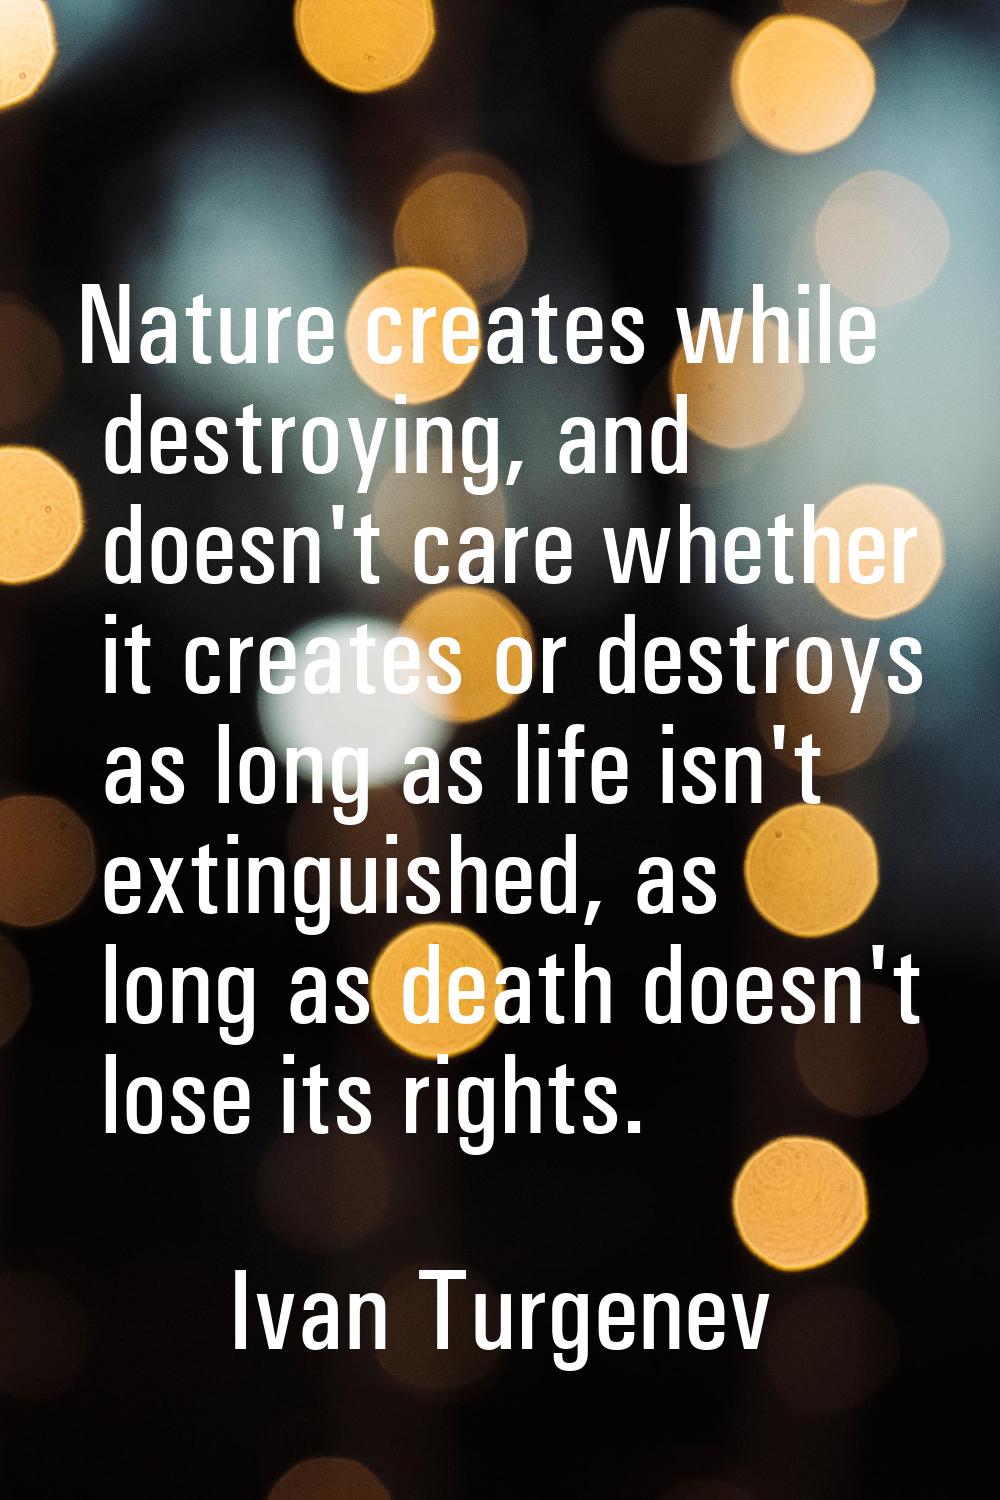 Nature creates while destroying, and doesn't care whether it creates or destroys as long as life is